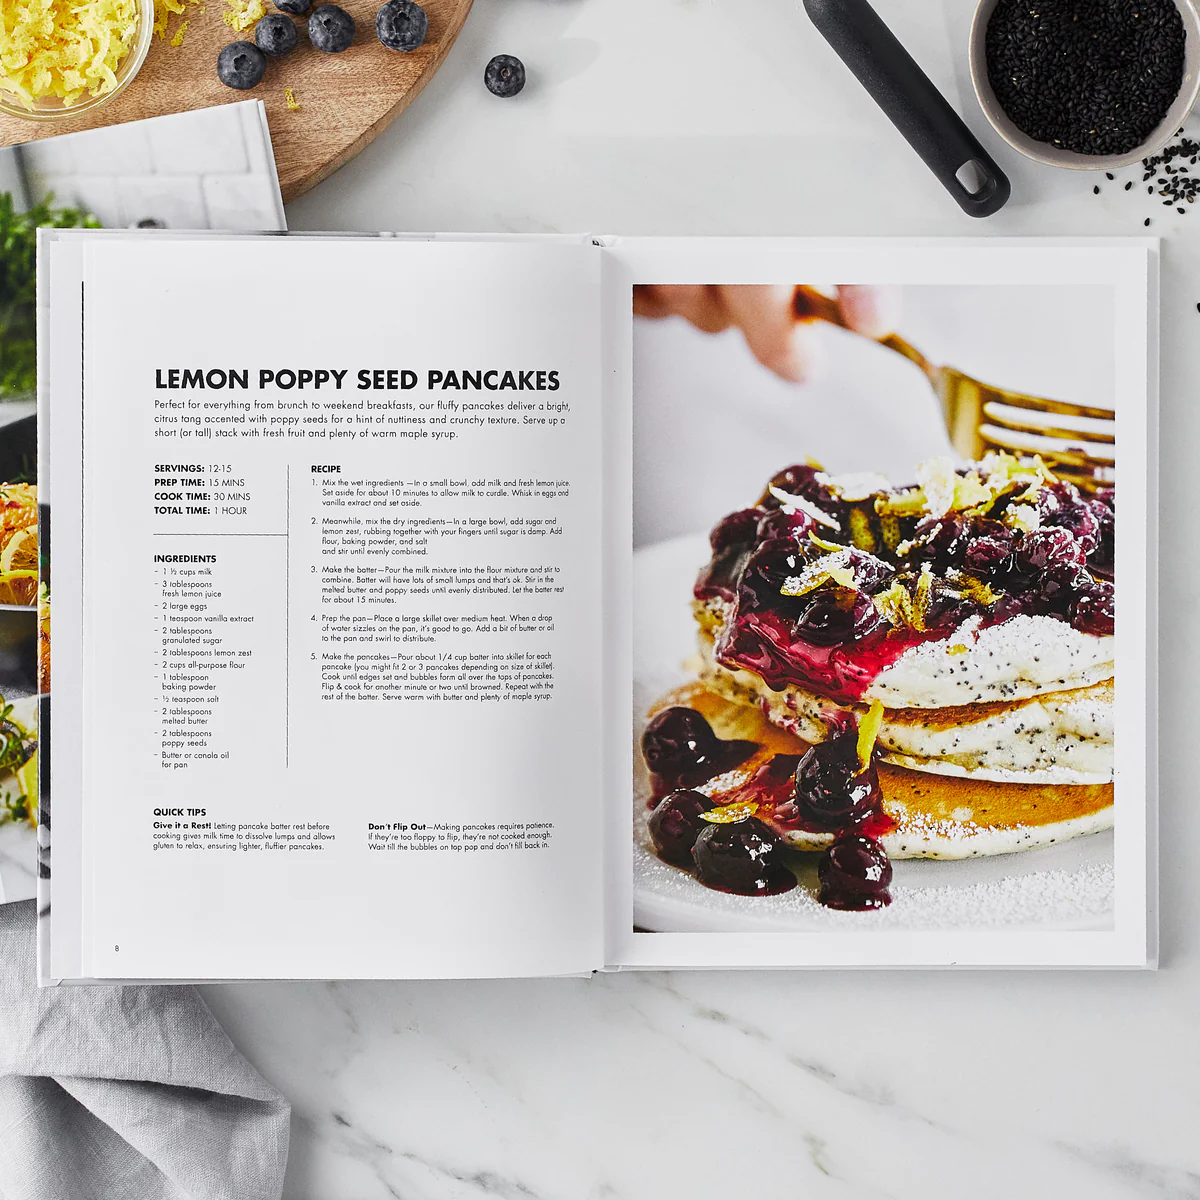 14. Create Culinary Memories with a Personalized Anniversary Cookbook for Him